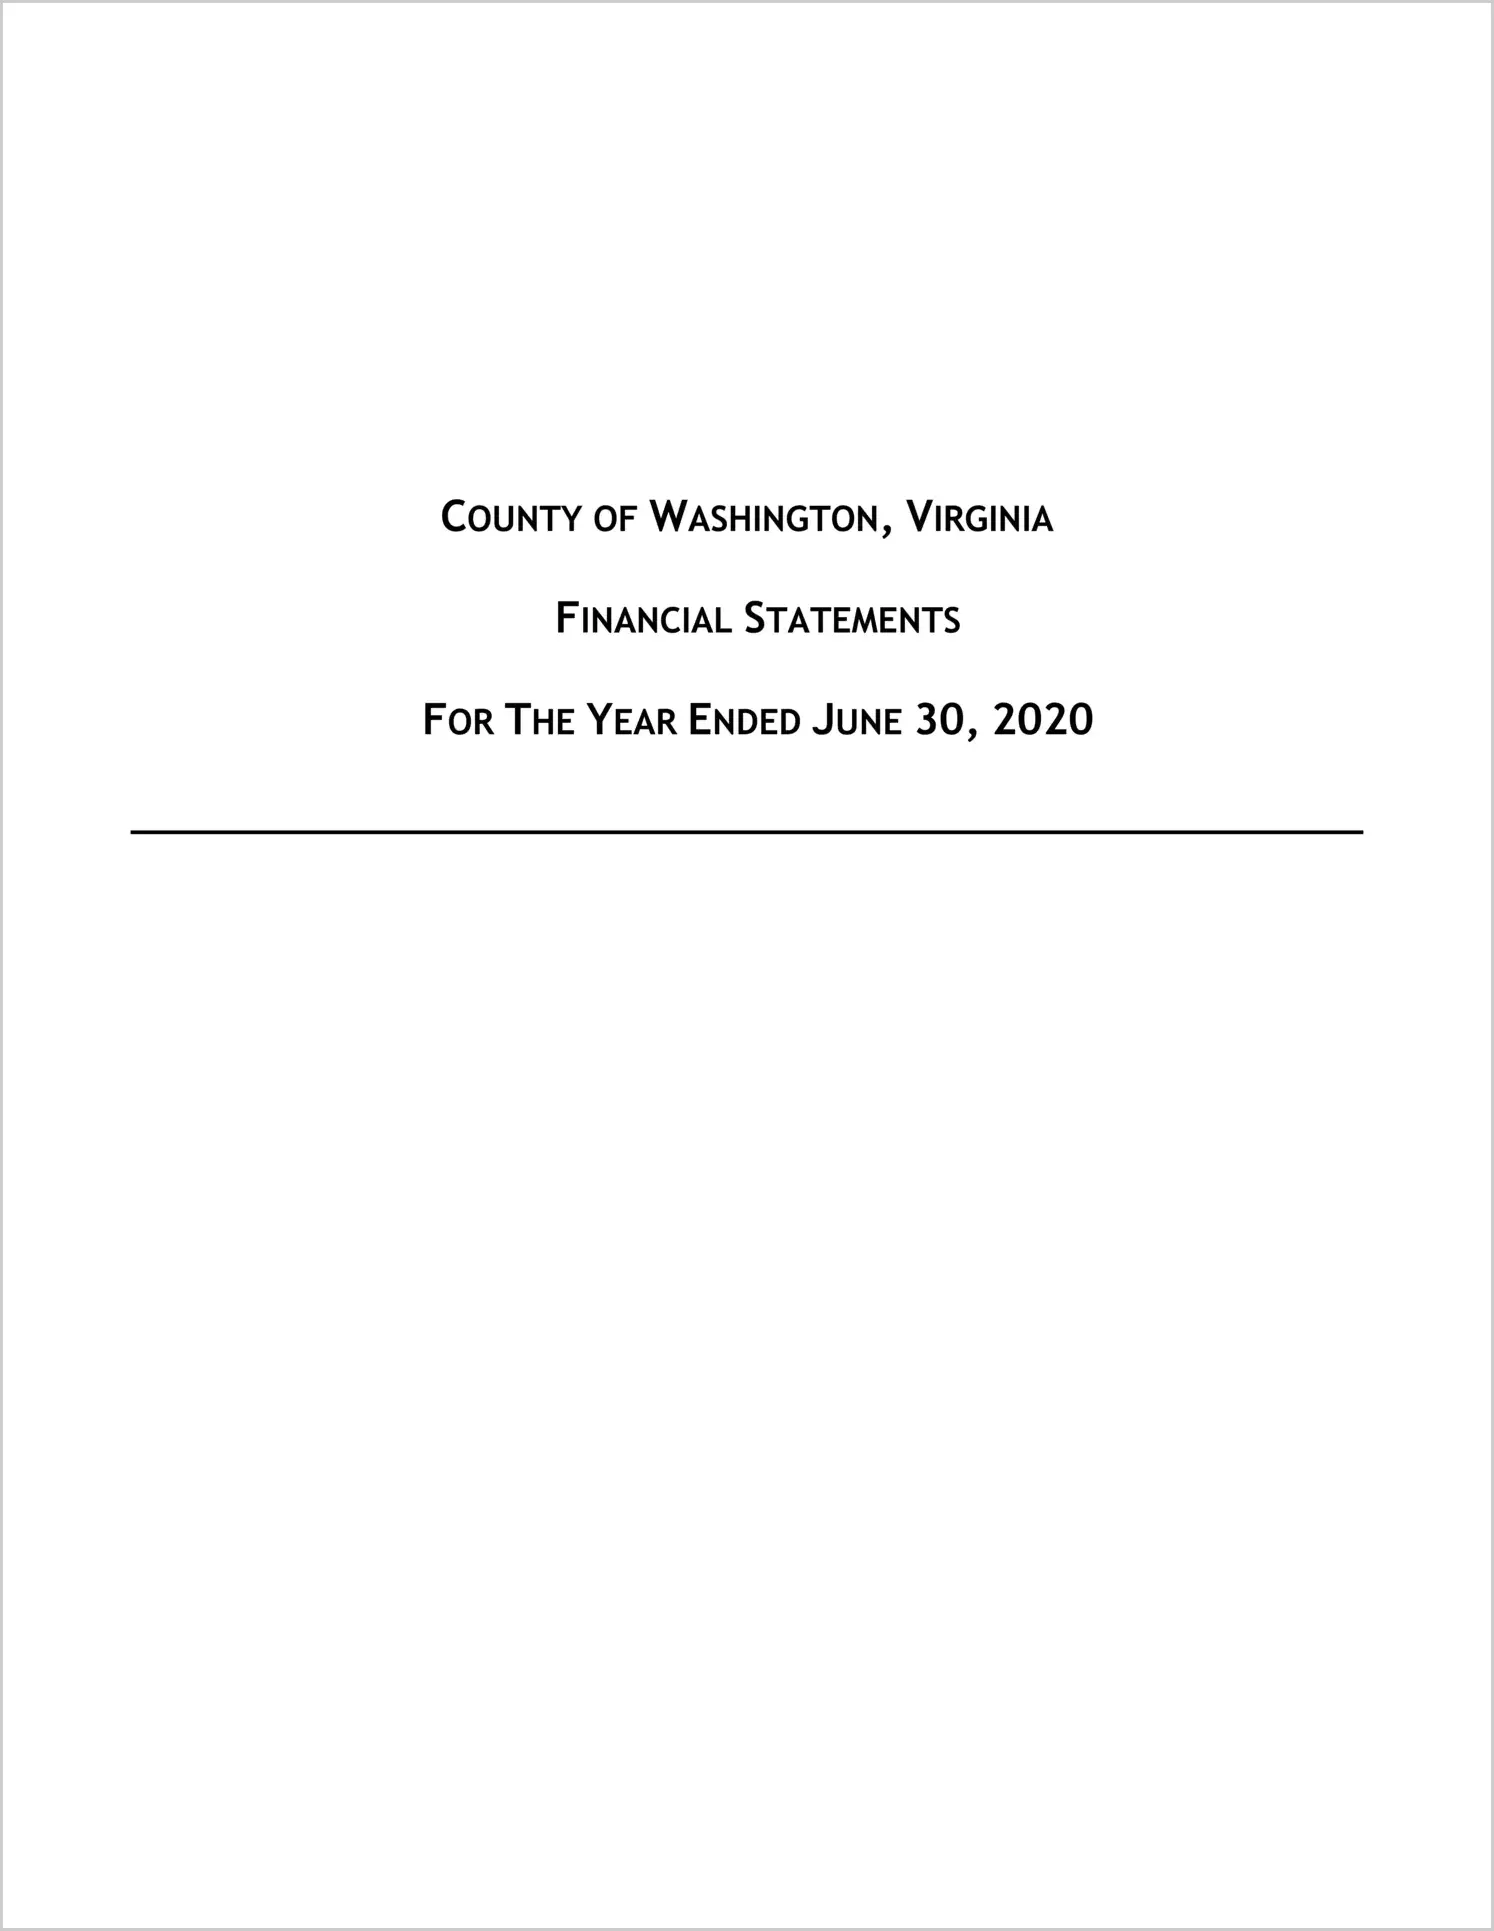 2020 Annual Financial Report for County of Washington